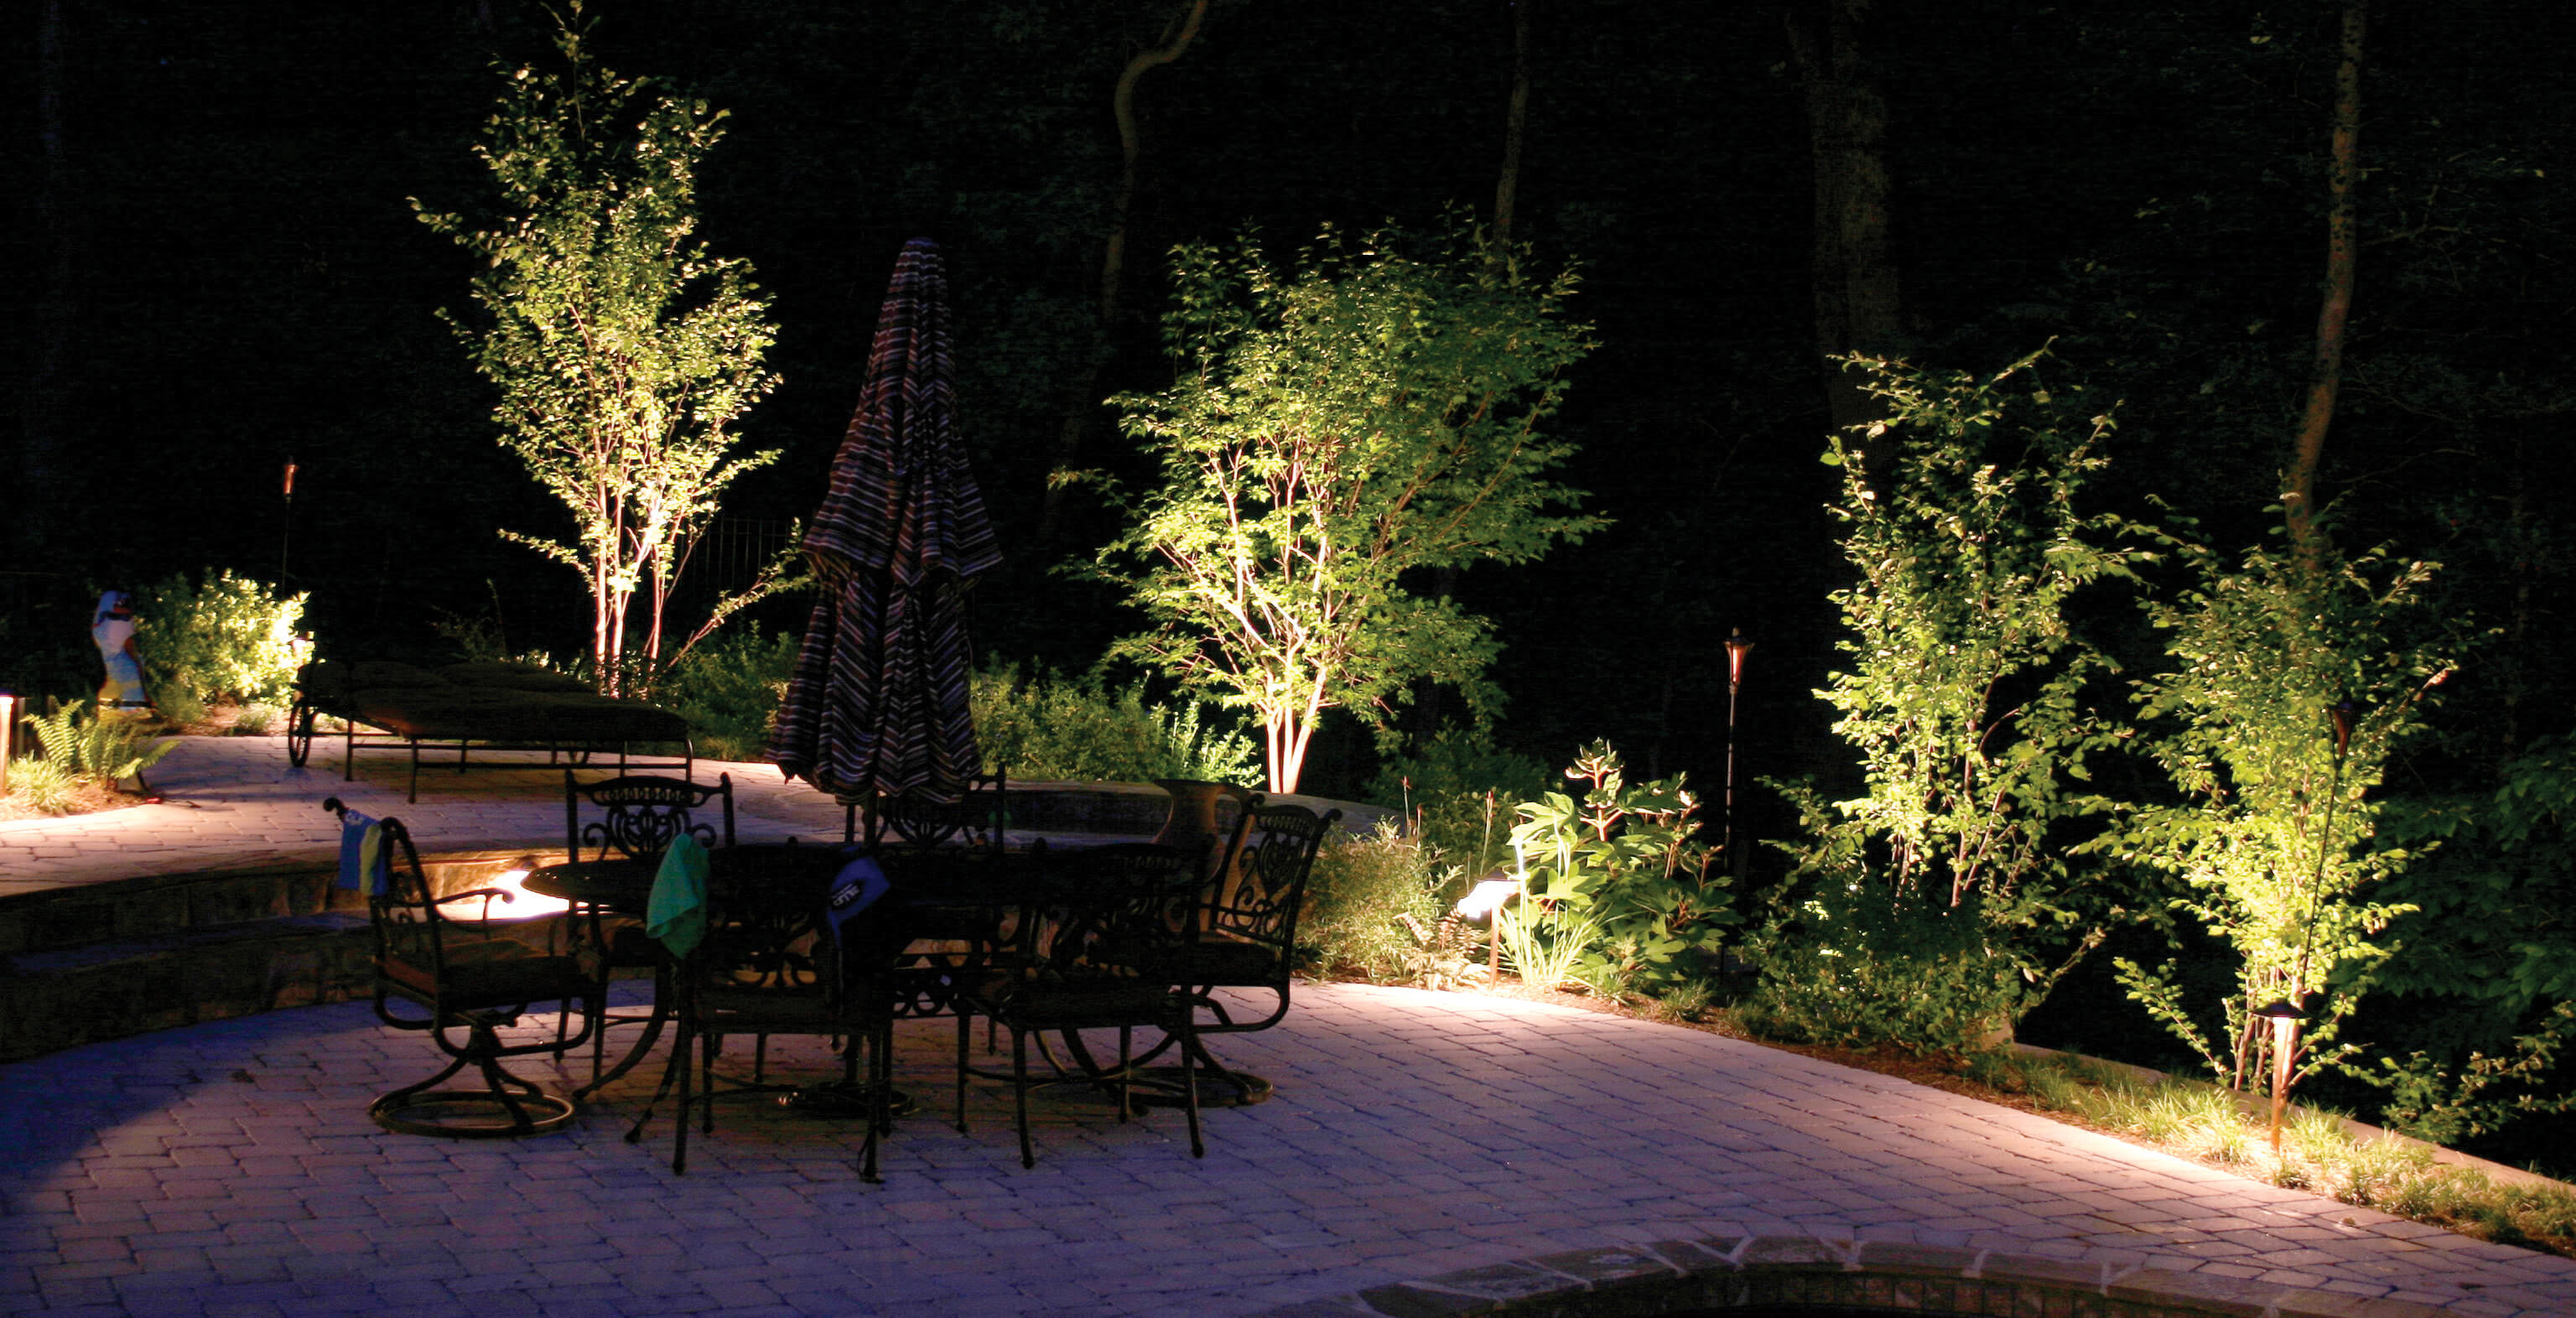 Outdoor seating area with LED lighting